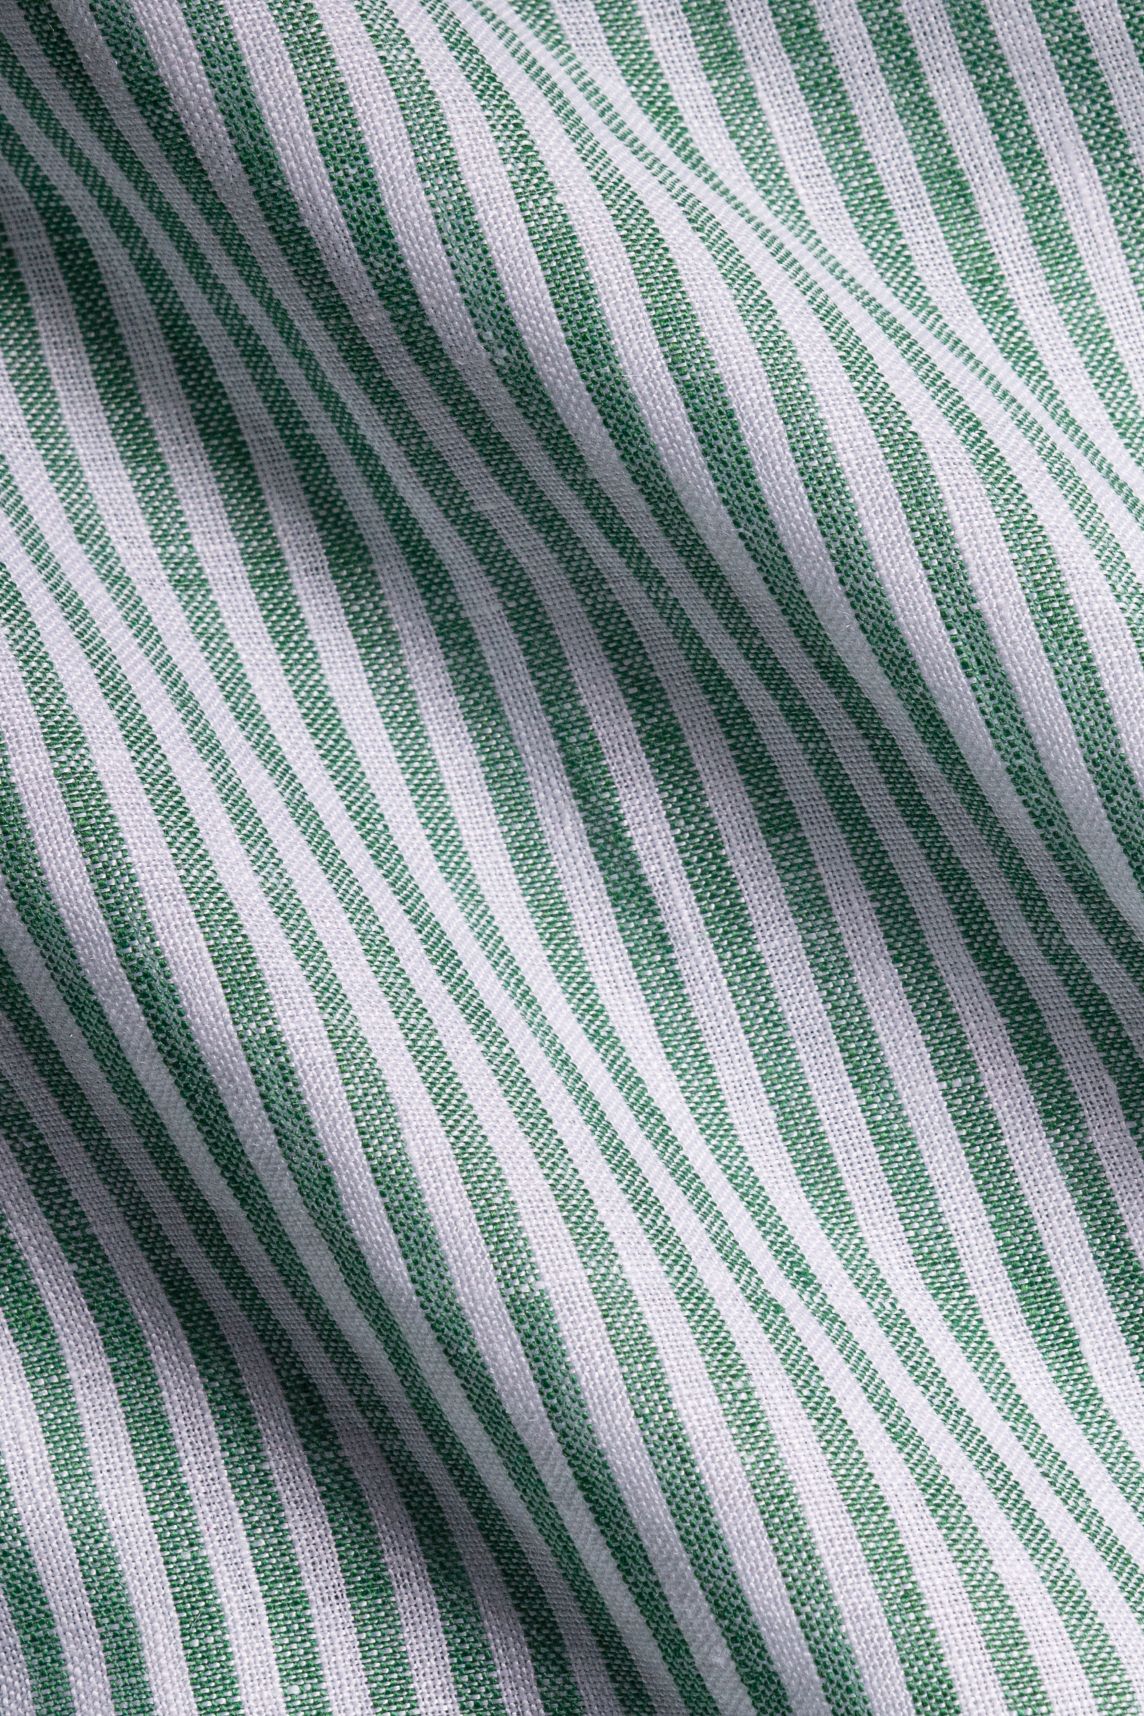 Green Striped Knitted Shirt